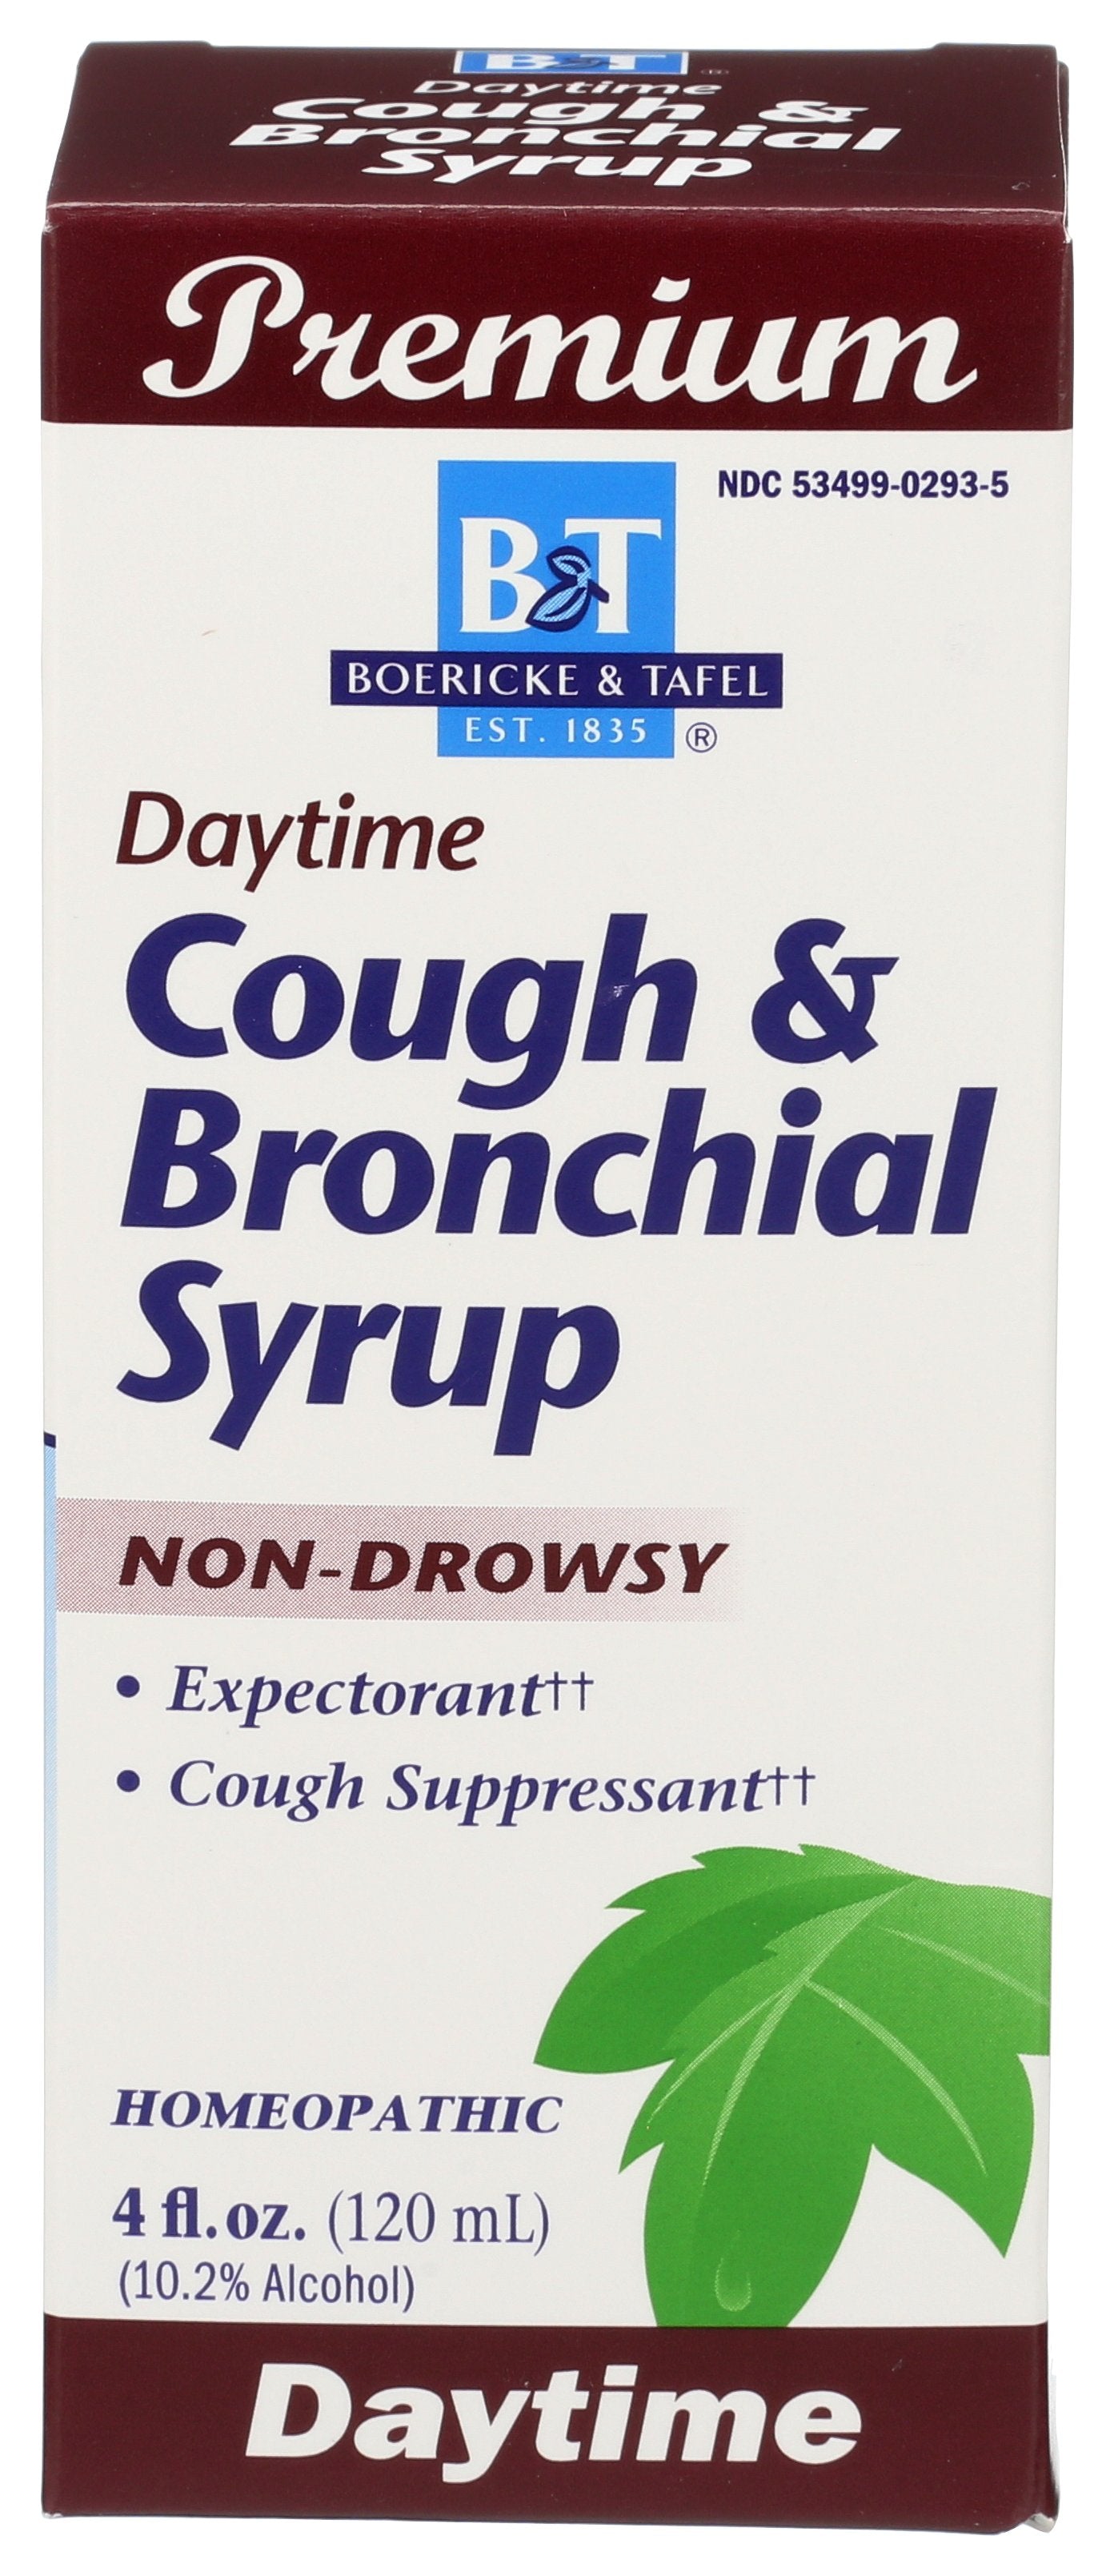 NATURES WAY B&T SYRUP COUGH N BRNCHL 4OZ D - Case of 6